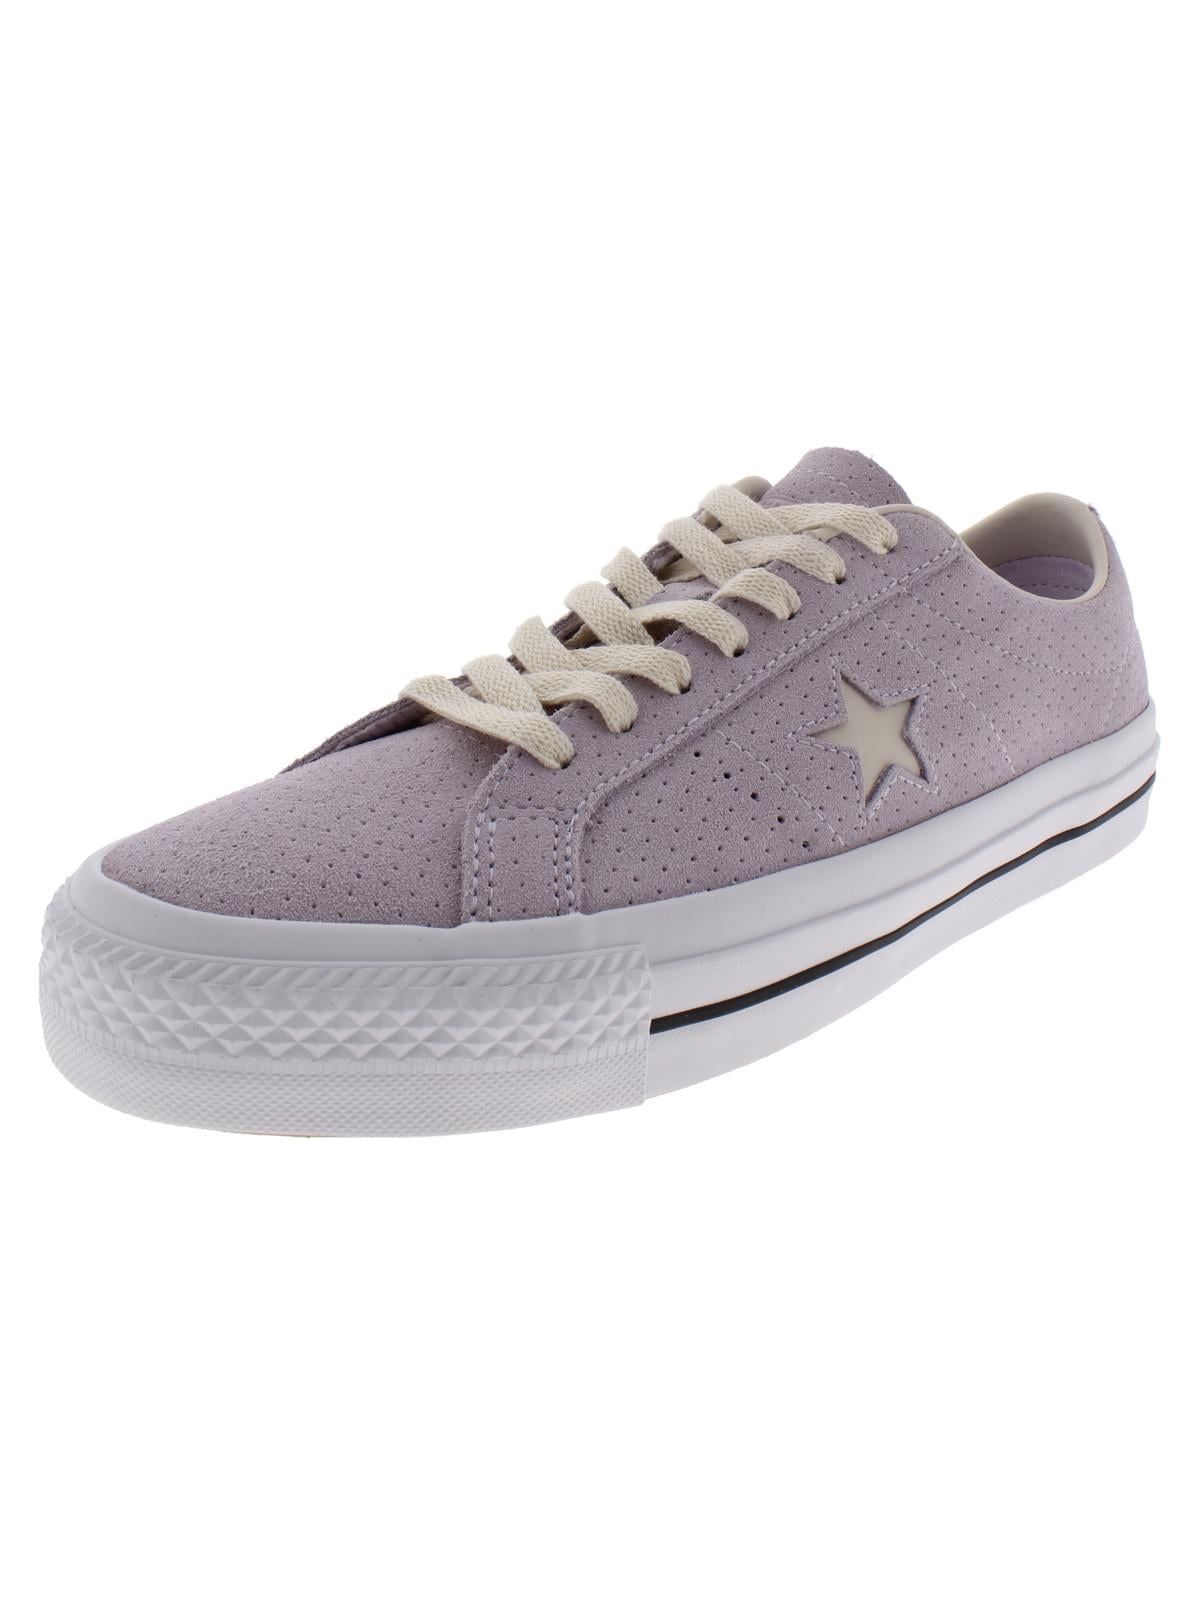 converse lifestyle one star